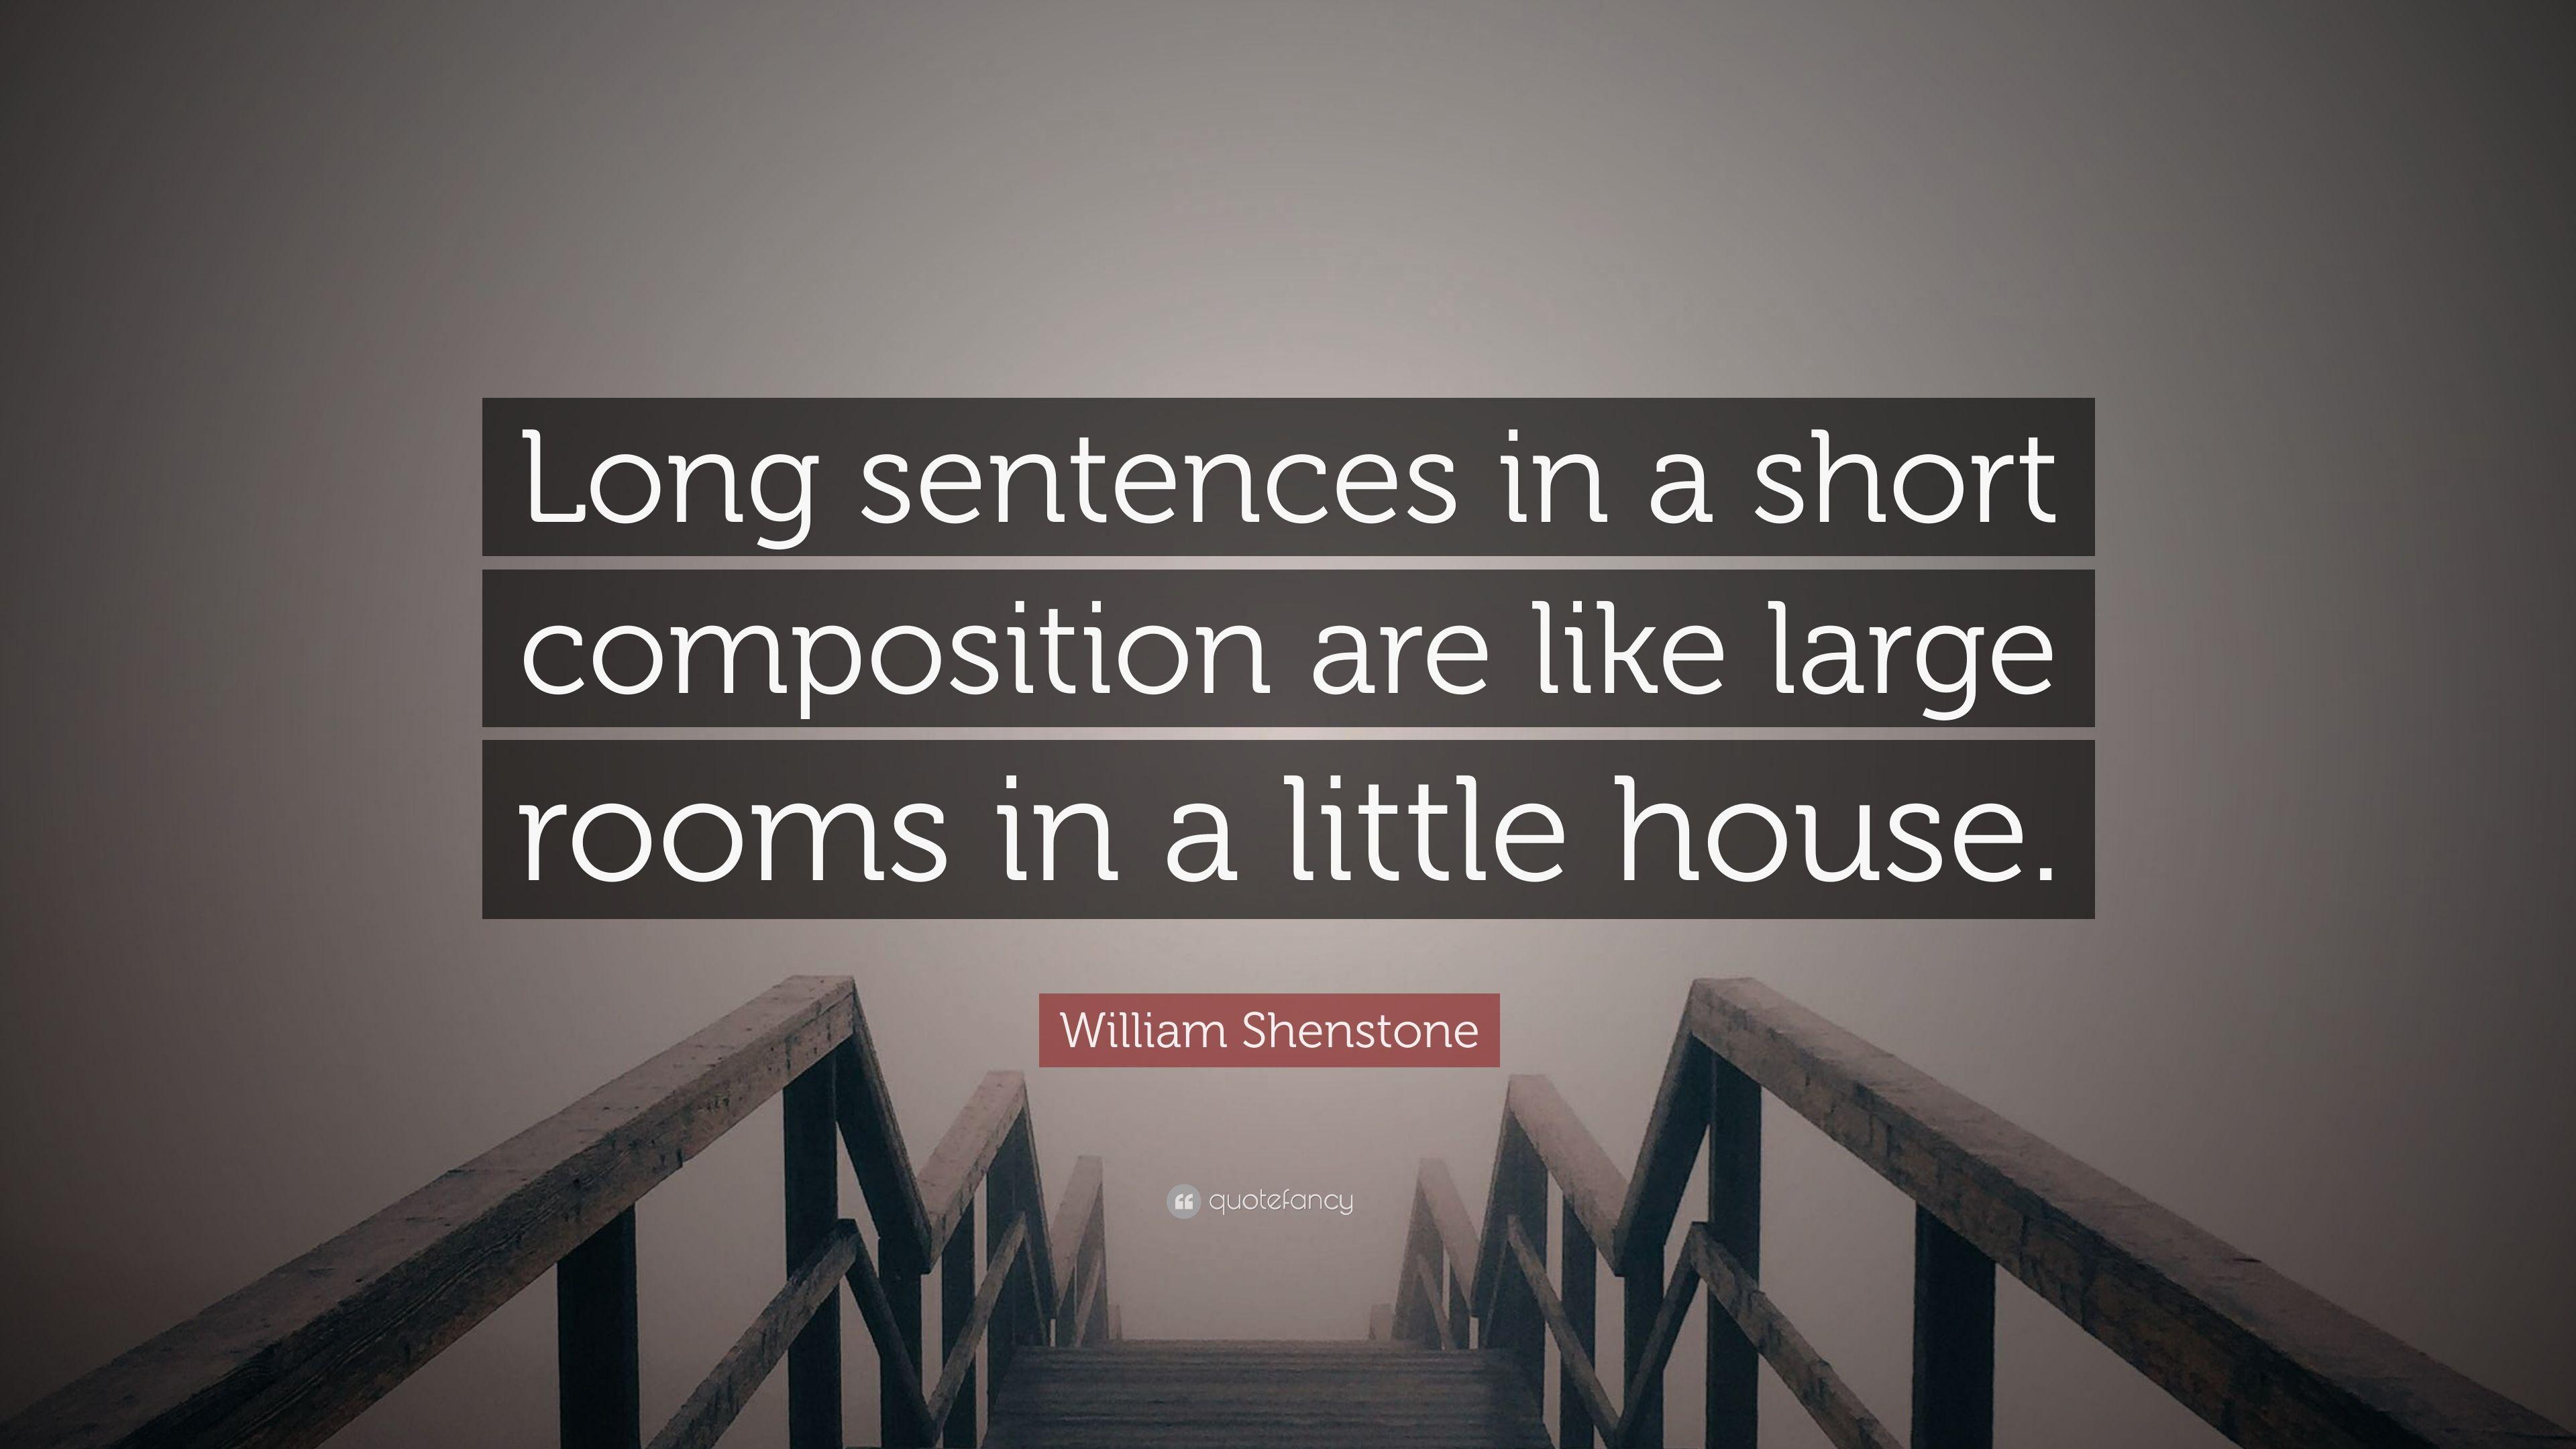 William Shenstone Quote: “Long sentences in a short composition are